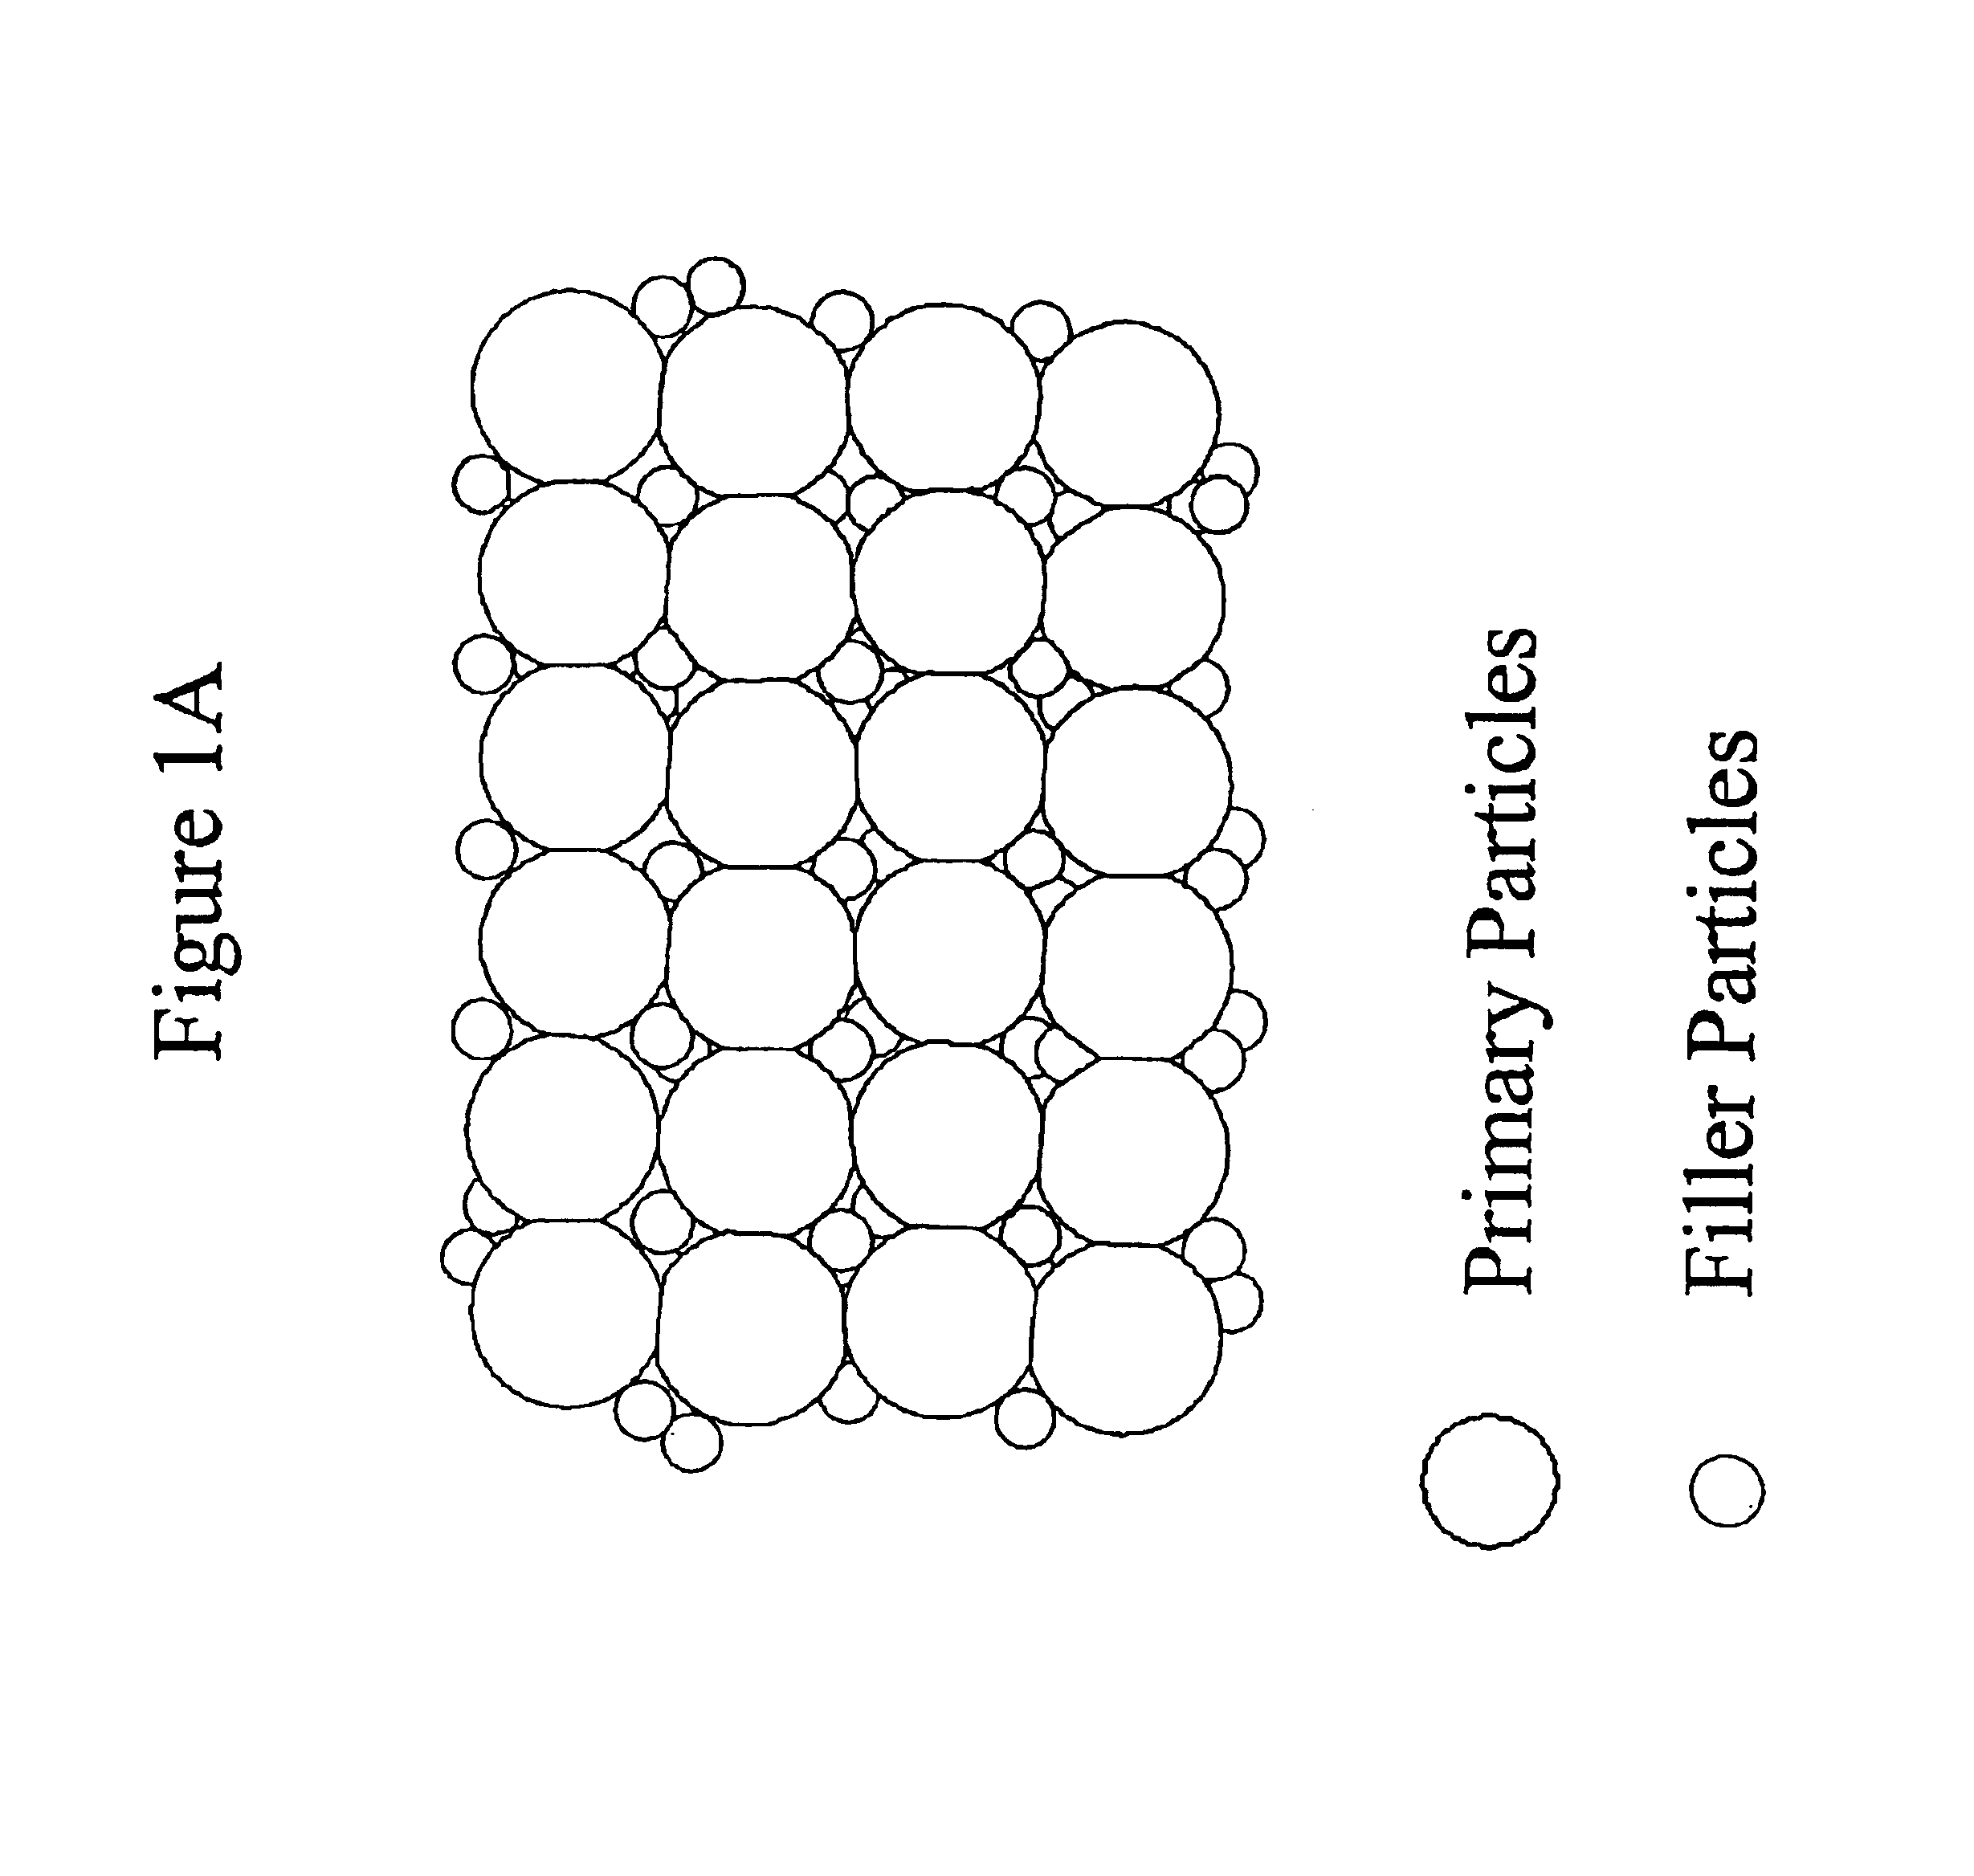 Electrophoretic display with a bi-modal particle system